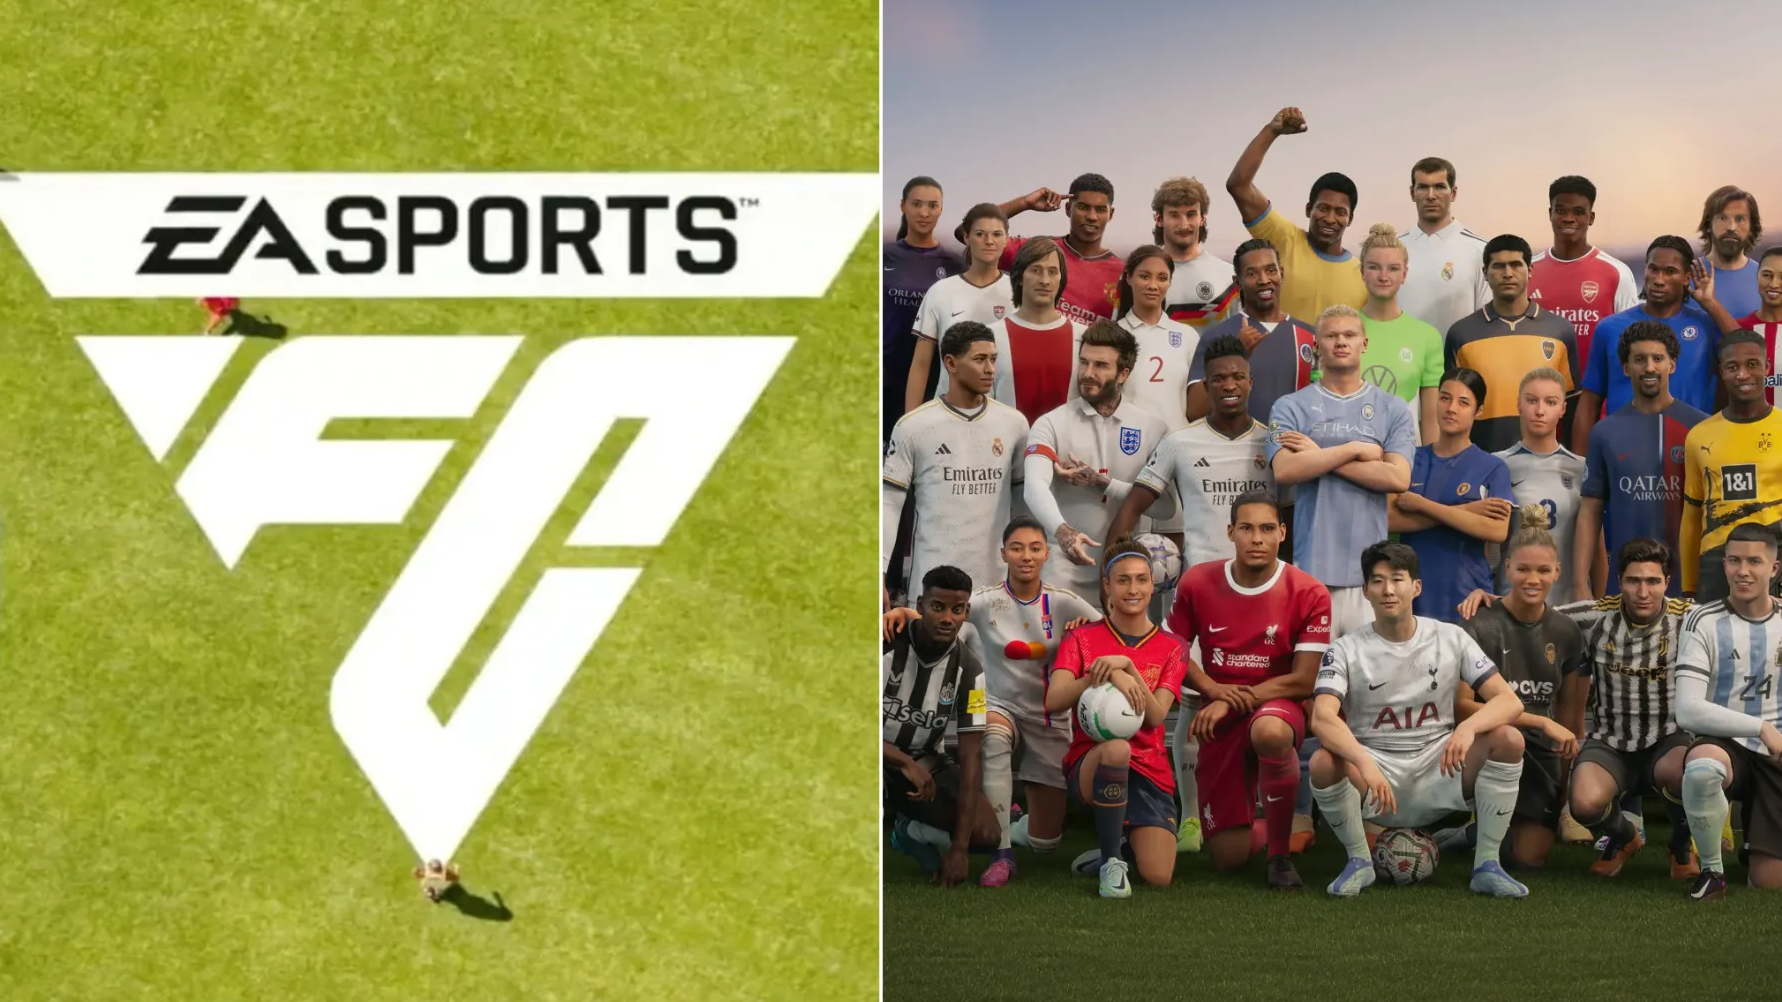 Carson Pickett is the First Player in EA Sports FC with a Limb Difference